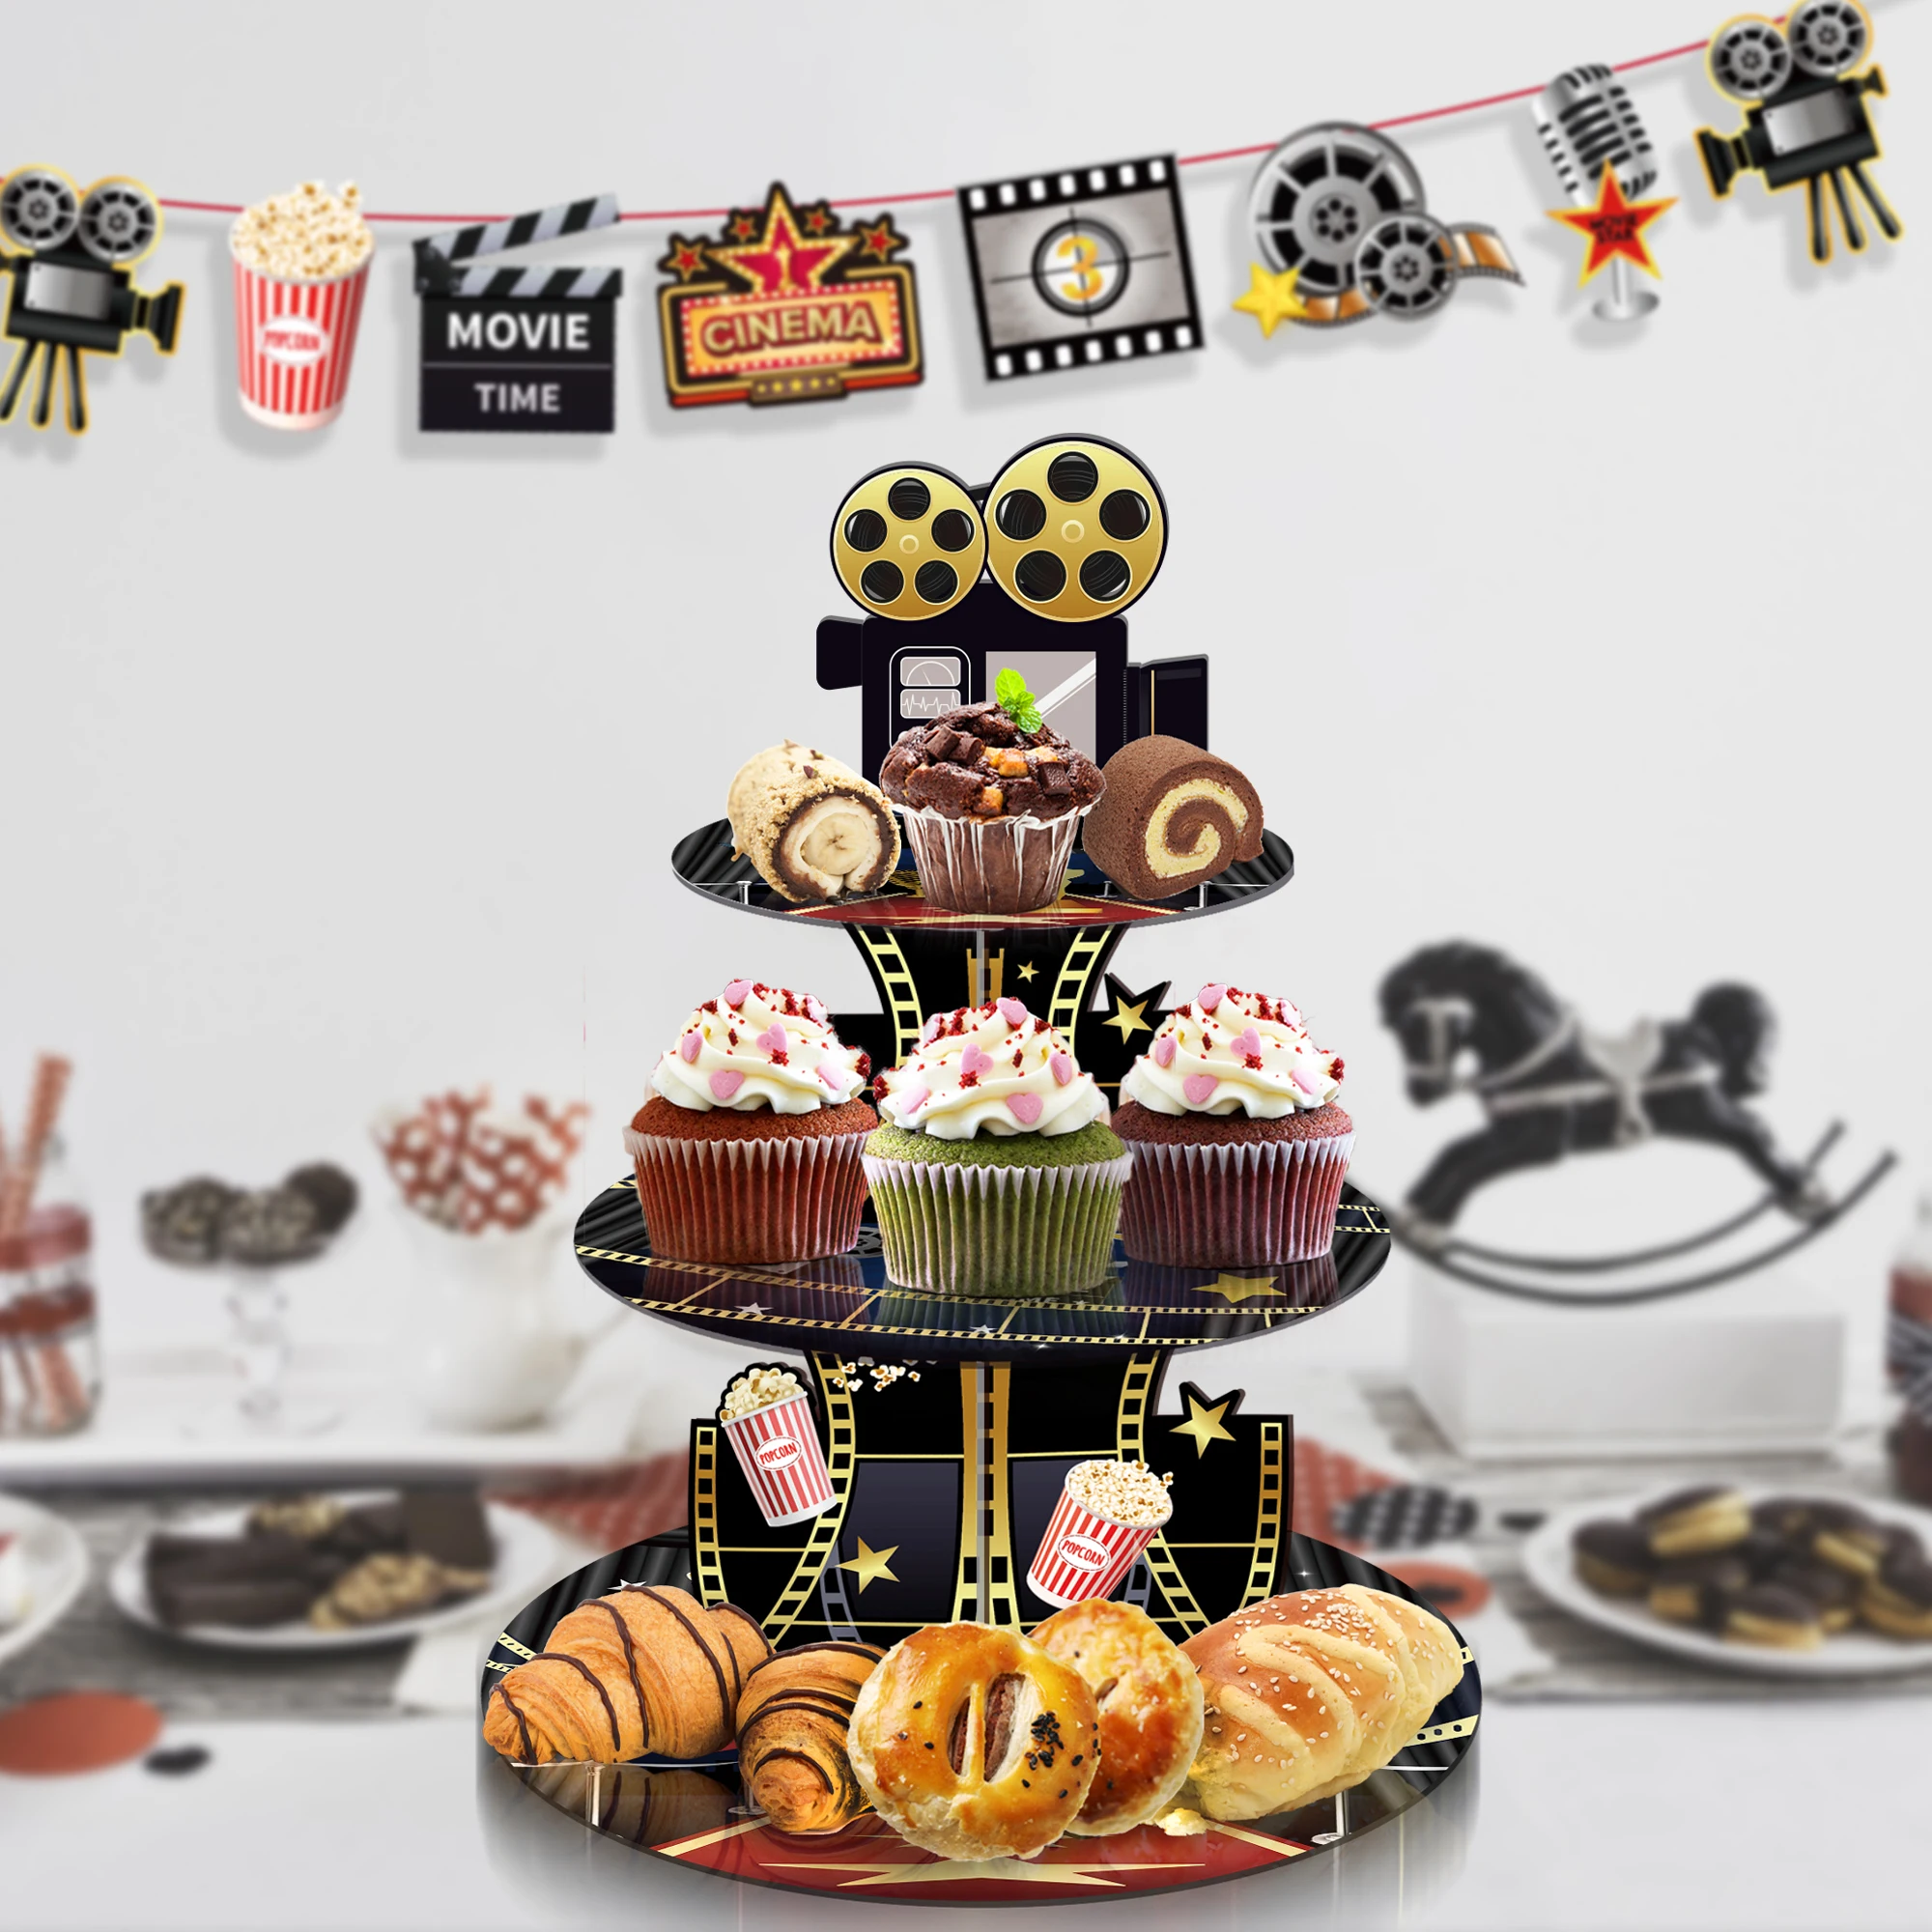 Hollywood Cinema Festival Party Cake Stand Display 3 Layer Movie Time  Showing Cupcake Rack Holder Birthday Party Cake Tray Decor